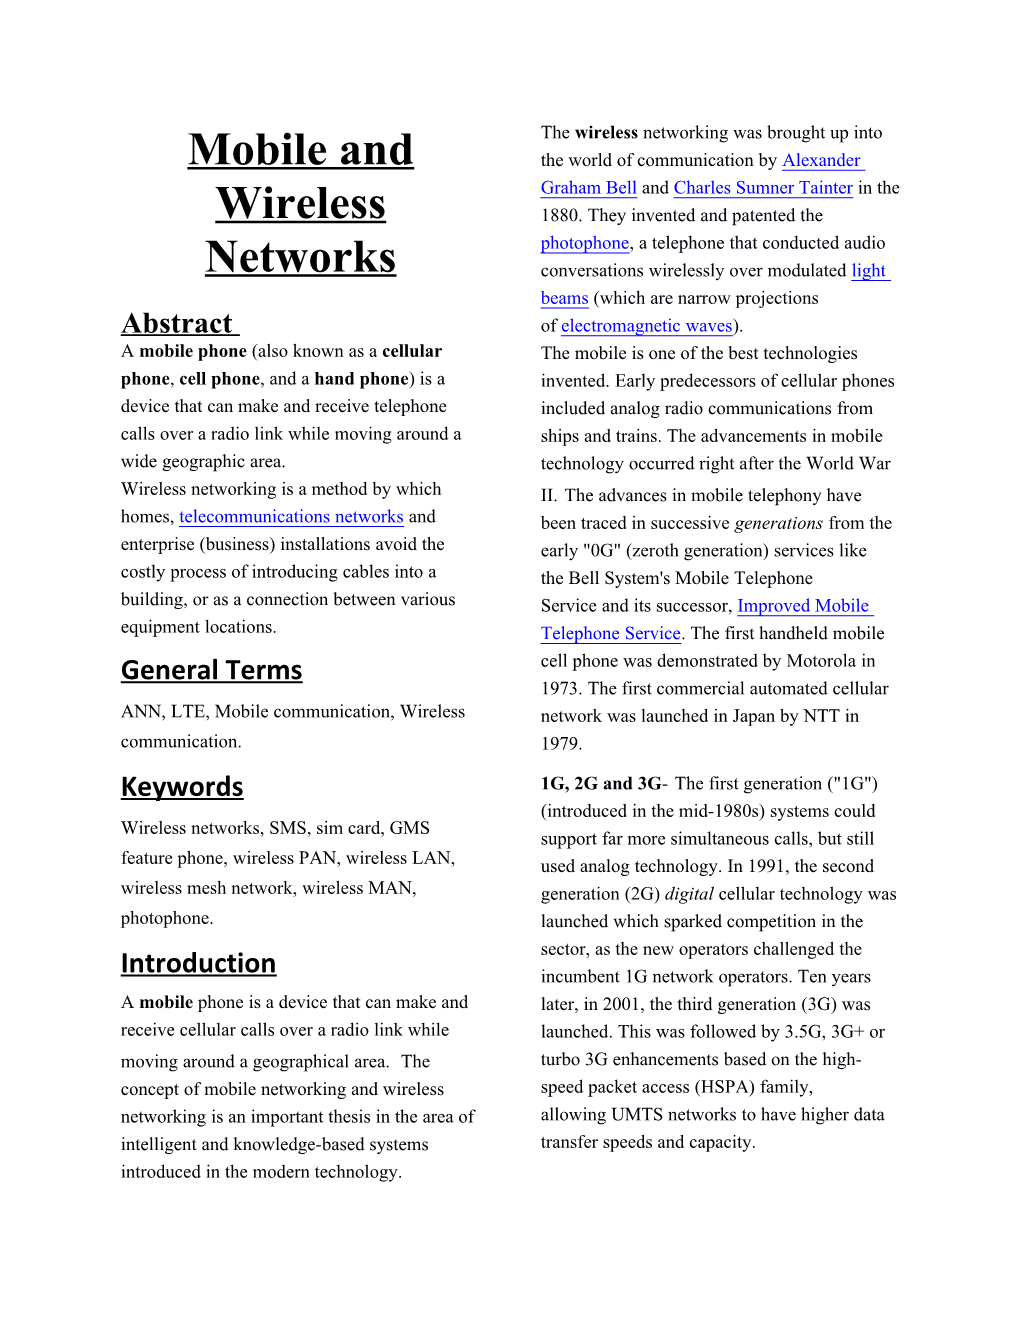 Mobile and Wireless Networks